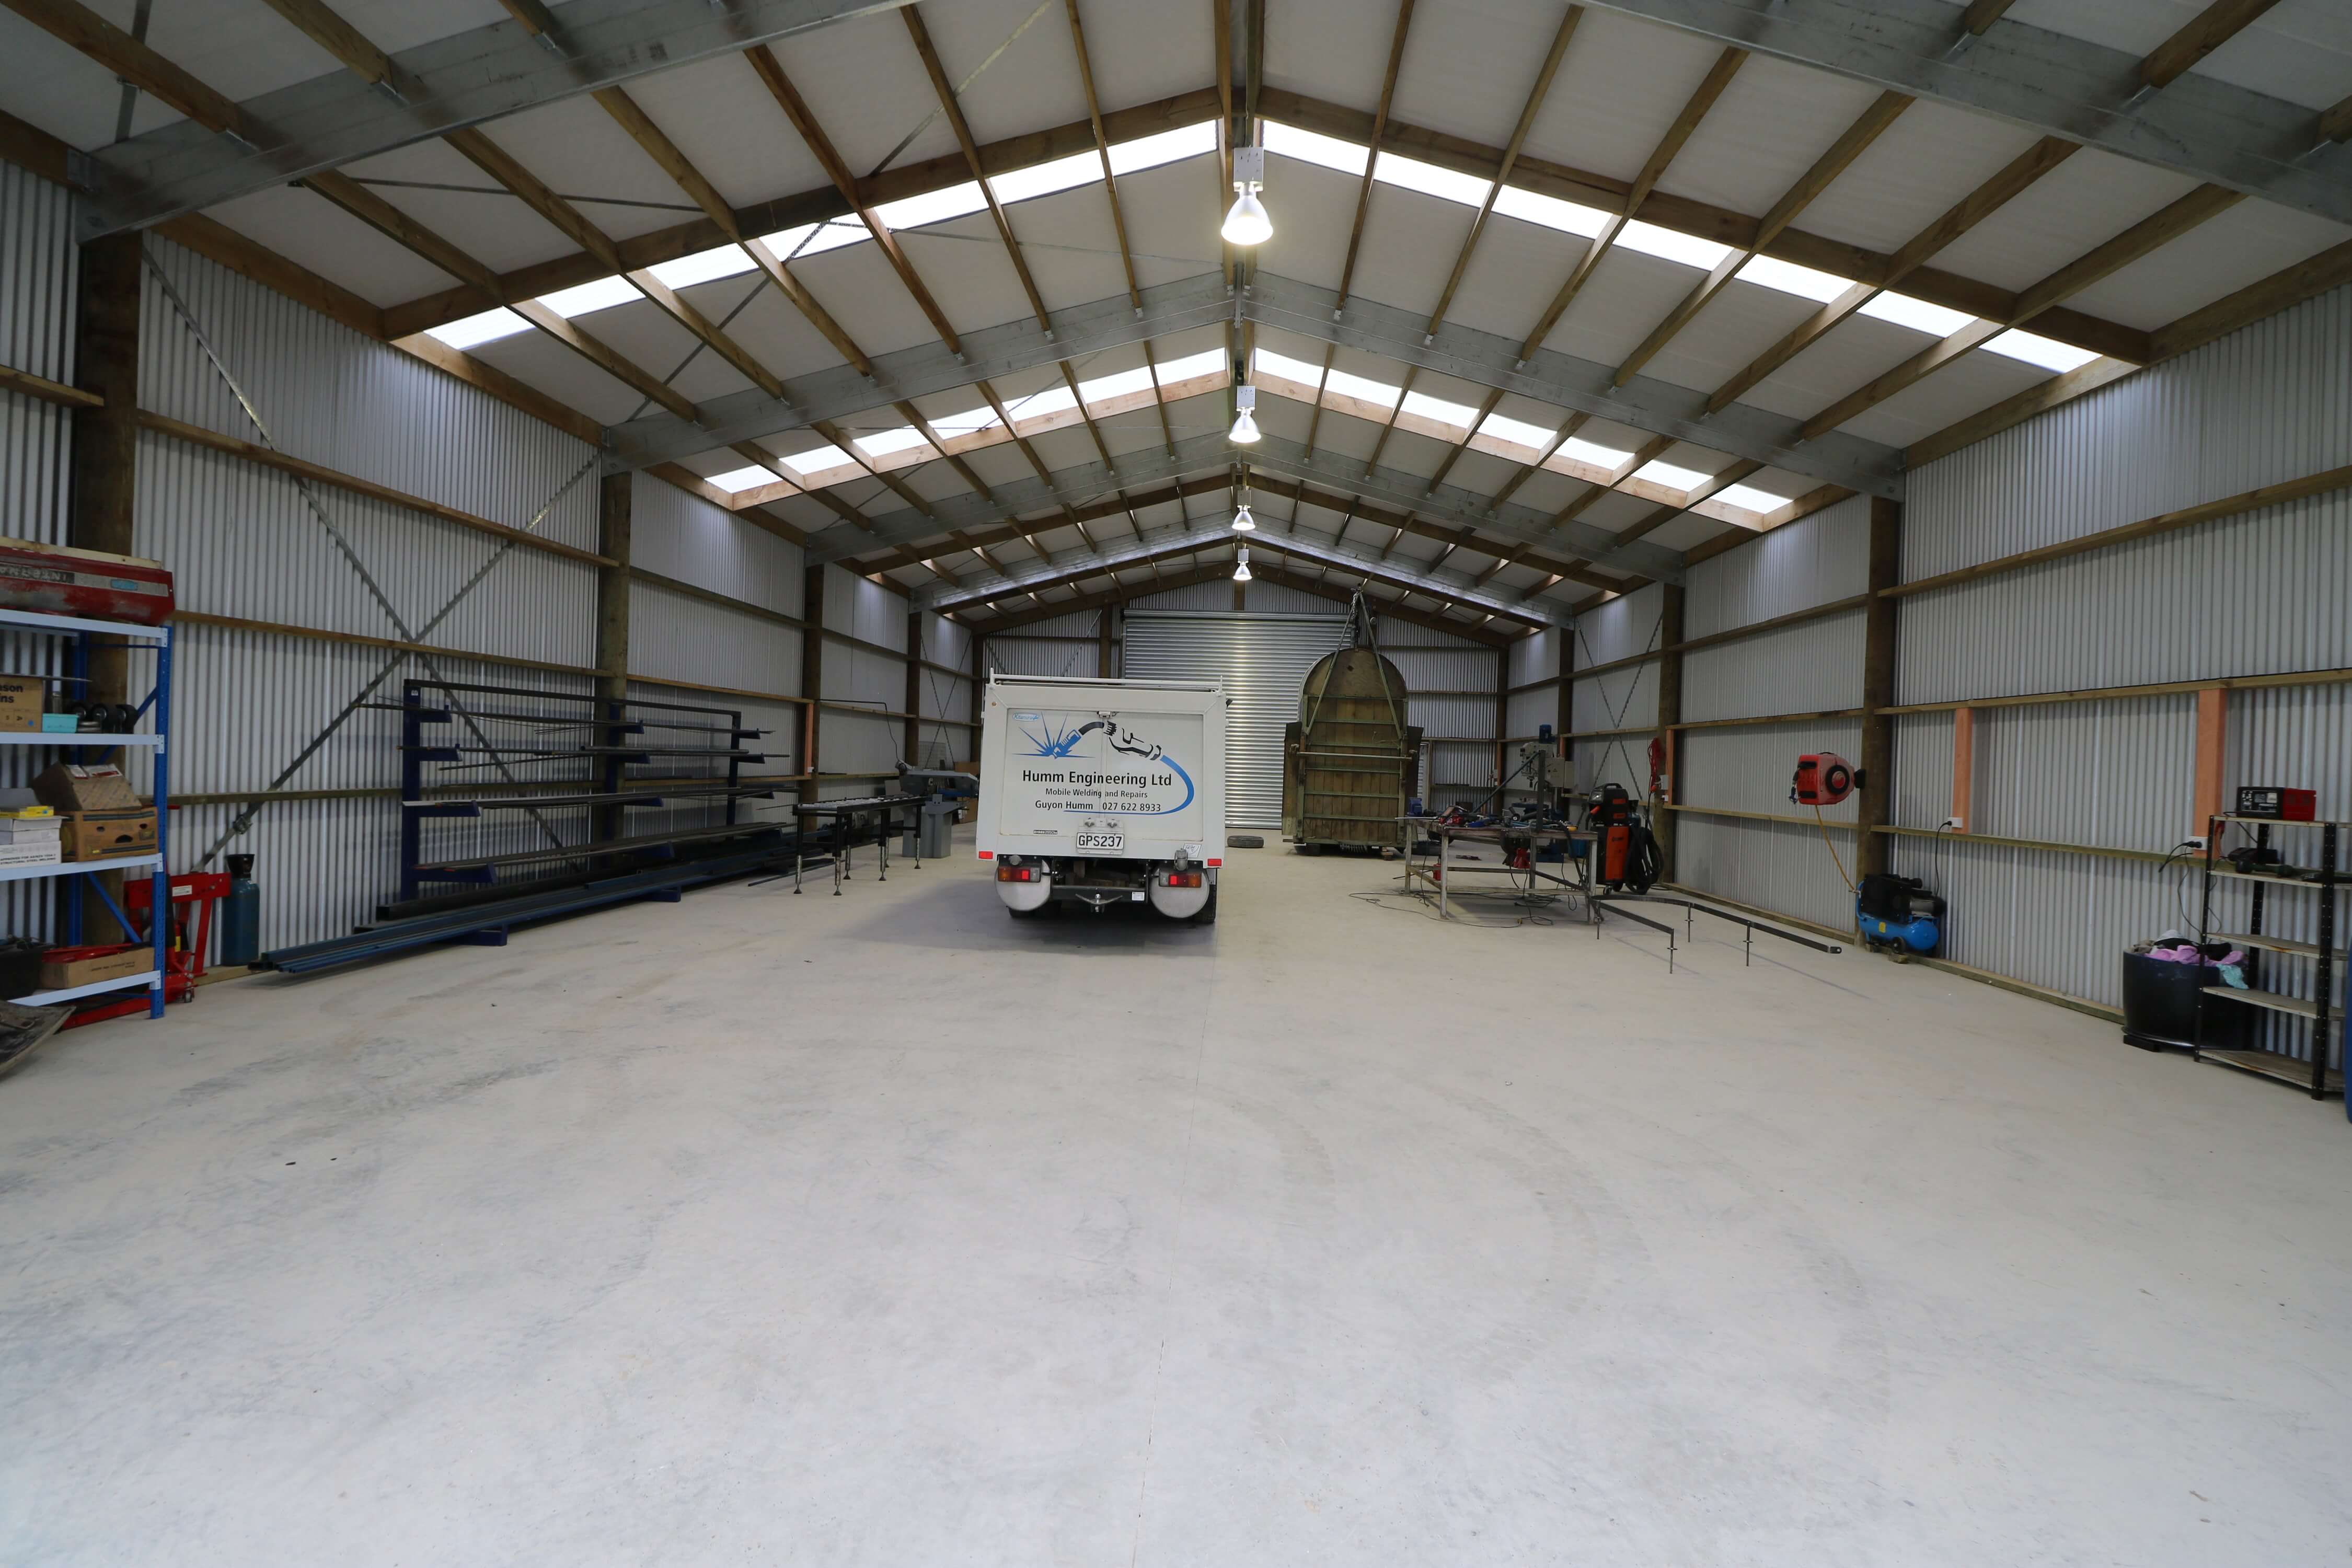 This large lockup shed has all the space to keep a large collection of vehicles safe